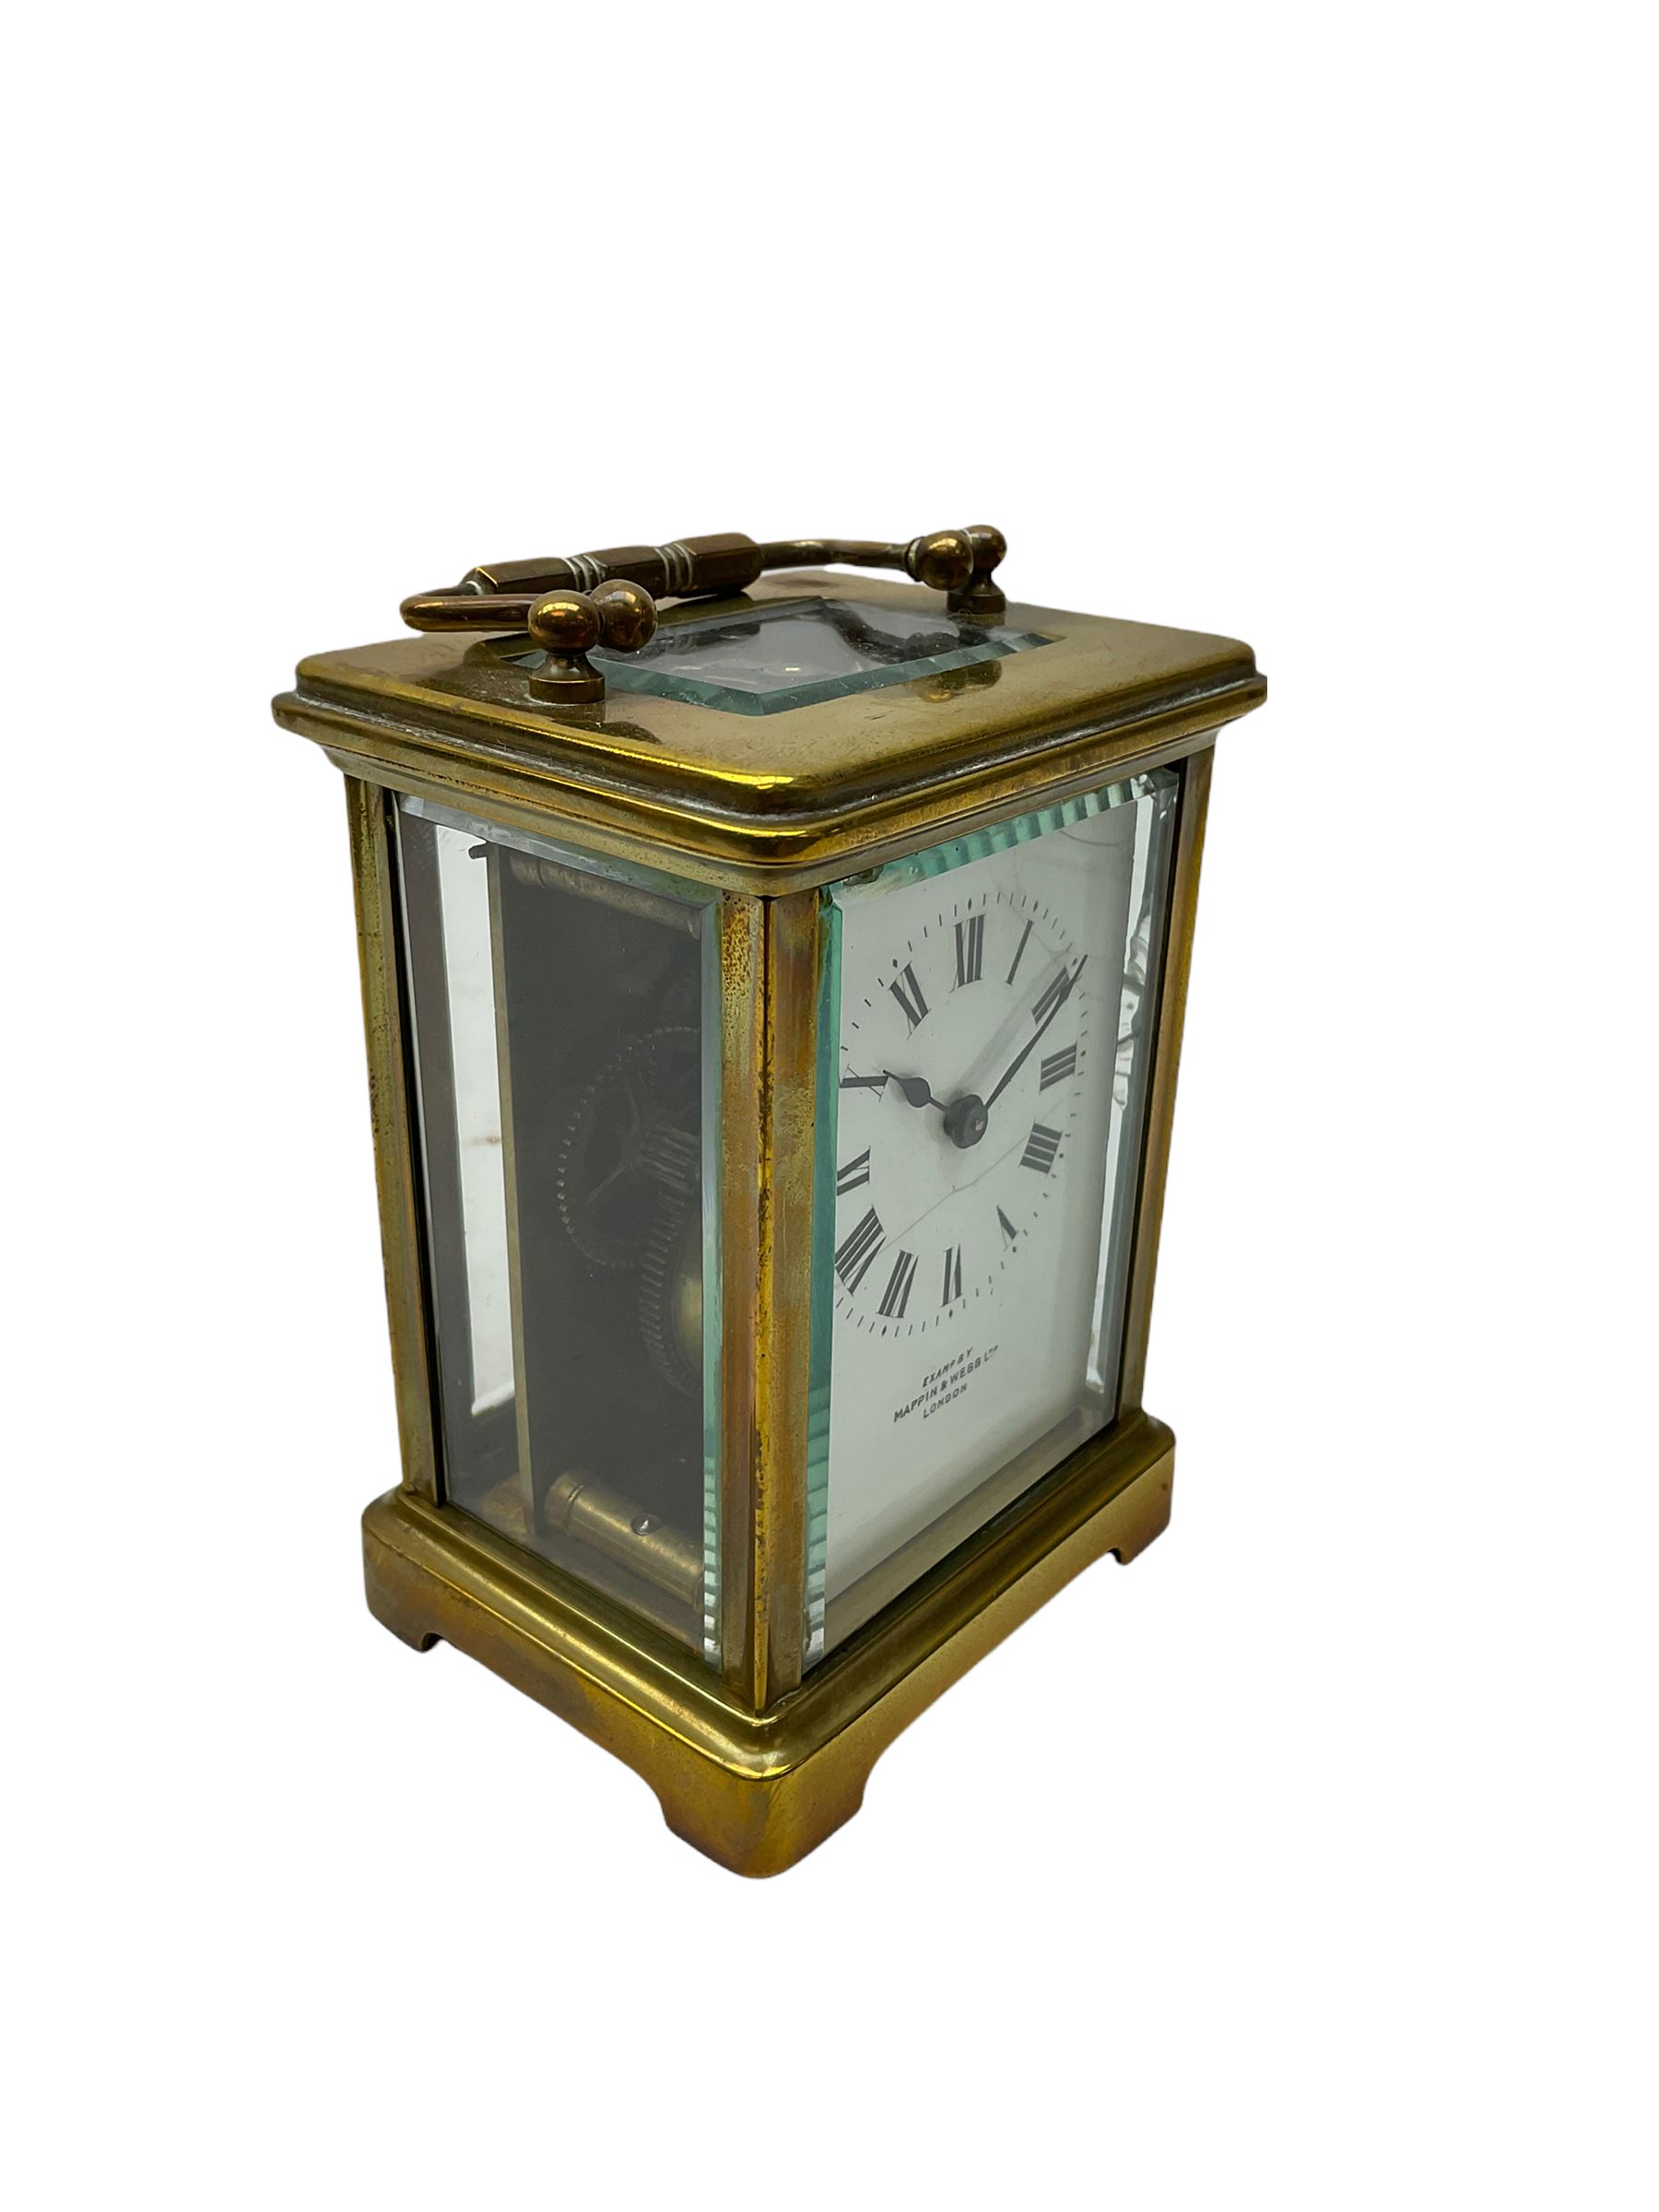 A Corniche cased 20th century timepiece carriage clock retailed by Mappin & Webb - Image 2 of 4